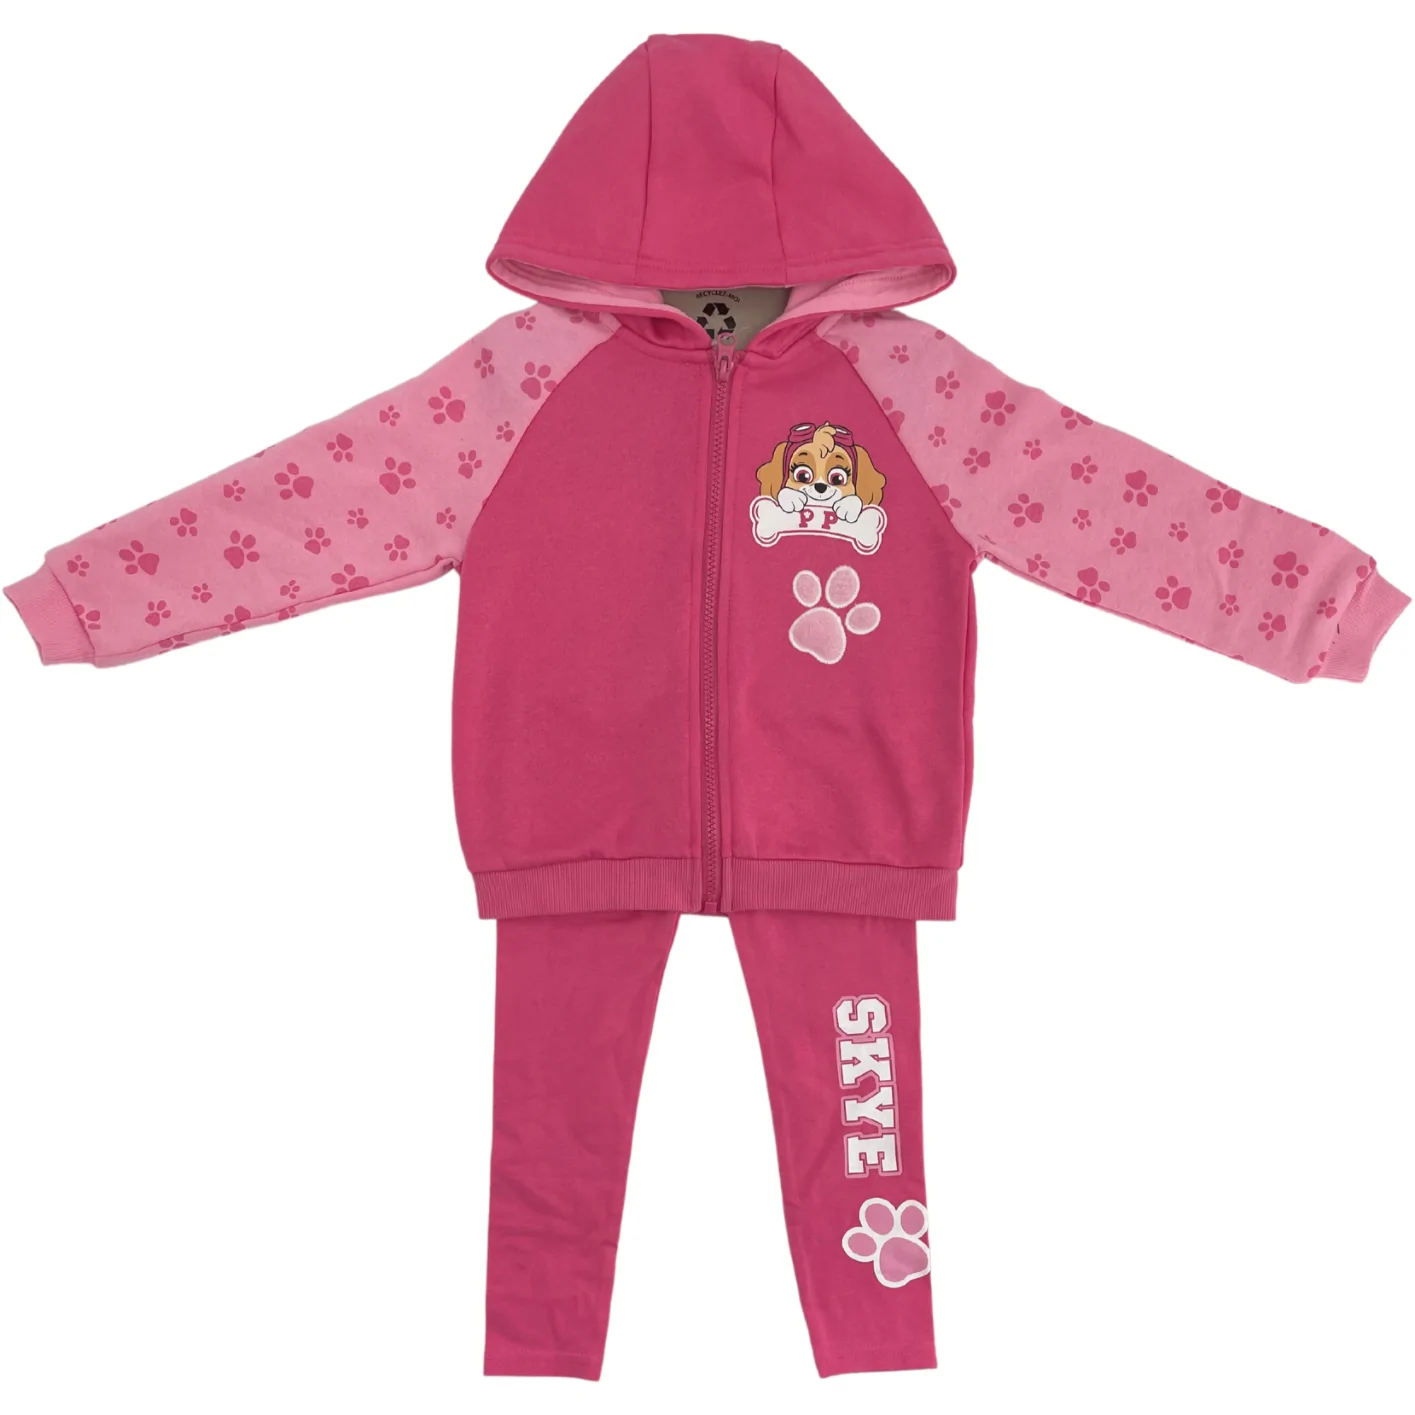 Nickelodeon Paw Patrol Girl's 2 Piece Set / Sweater with Pants / Pink / Size 4